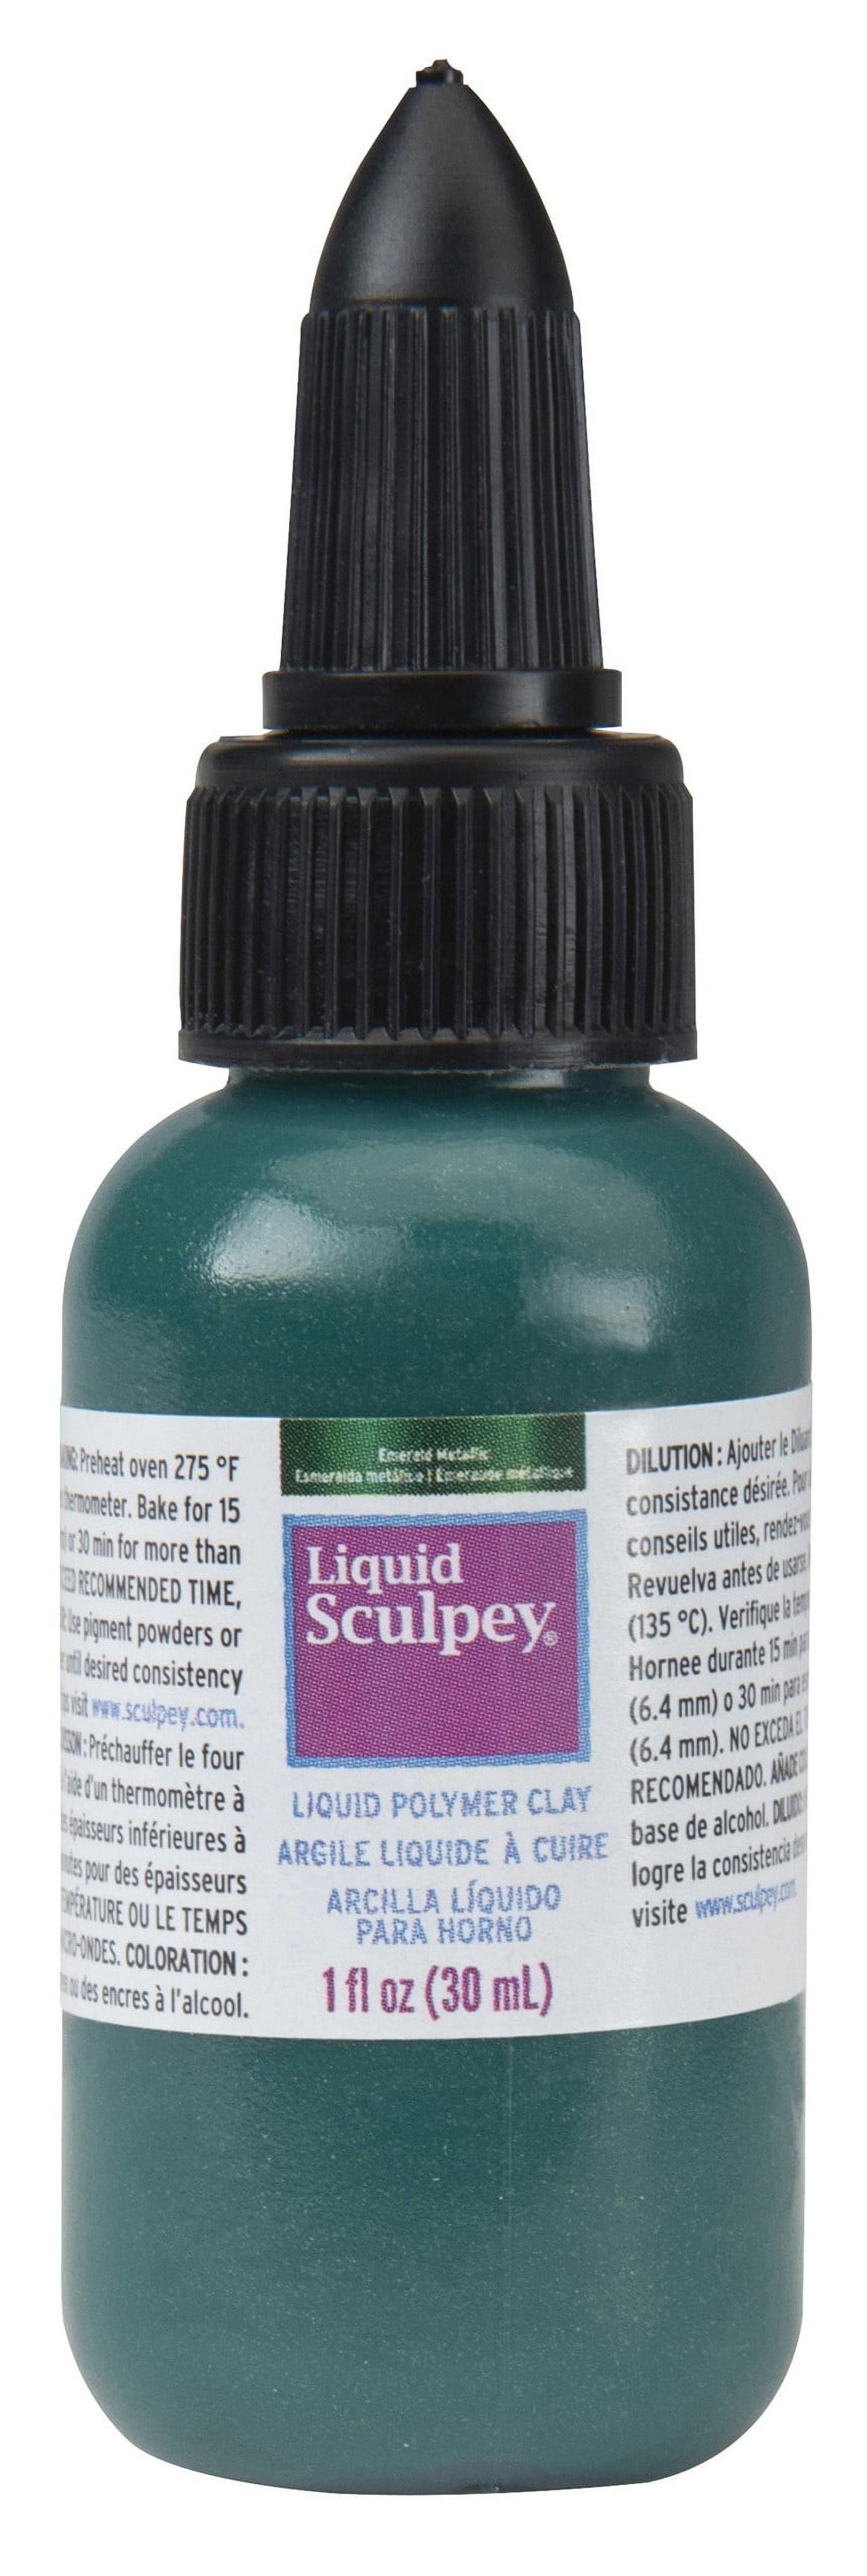 Sculpey Liquid Polymer Clay, Black, 59 Ml, Bakeable, Mixing and Forming  Medium for All Polymer Clay Crafts, Jewelry Making Medium 